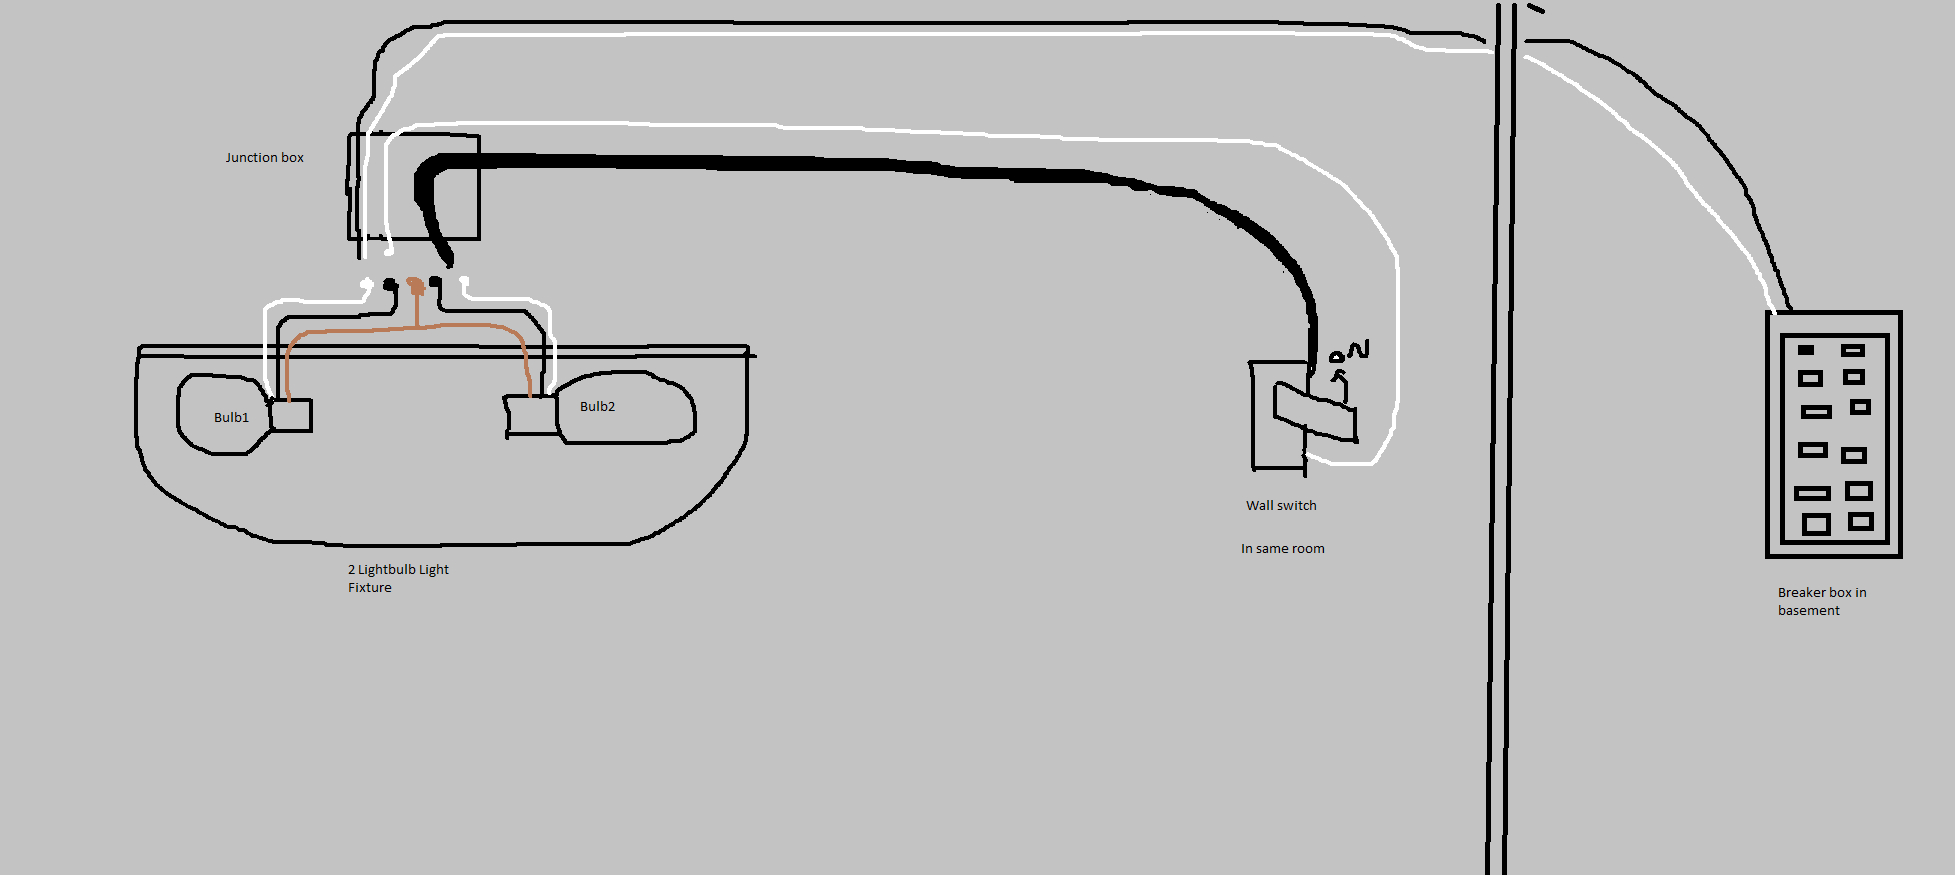 Electrical - A Light Fixture With 2 White, 2 Black Wires, 1 Copper - Junction Box Wiring Diagram